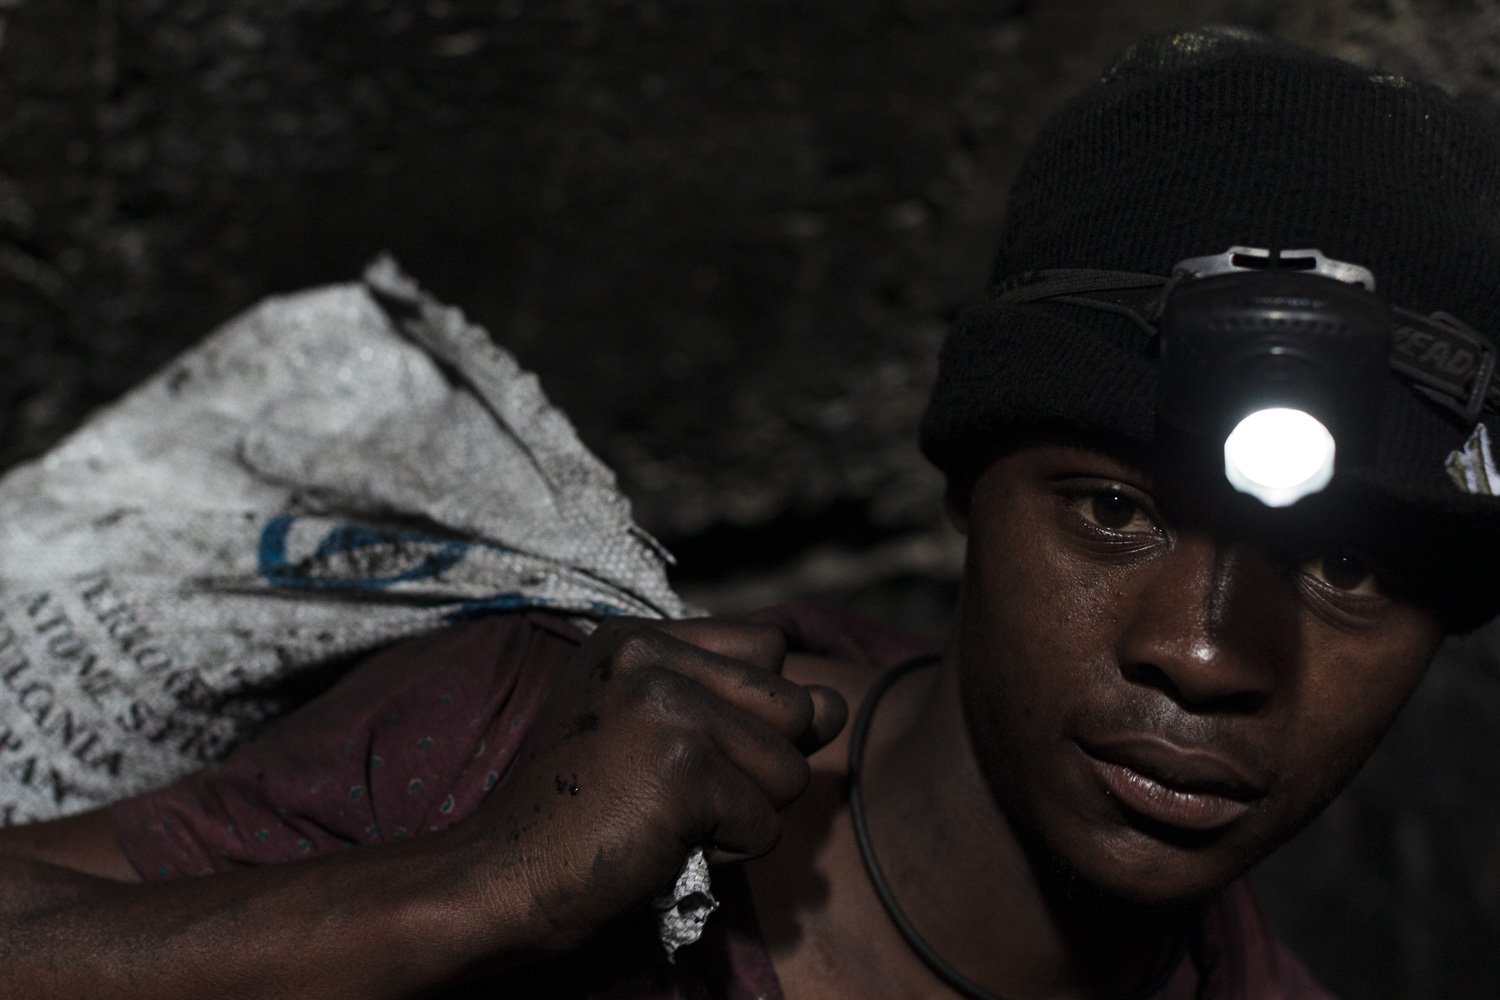 Coal and corruption in South Africa